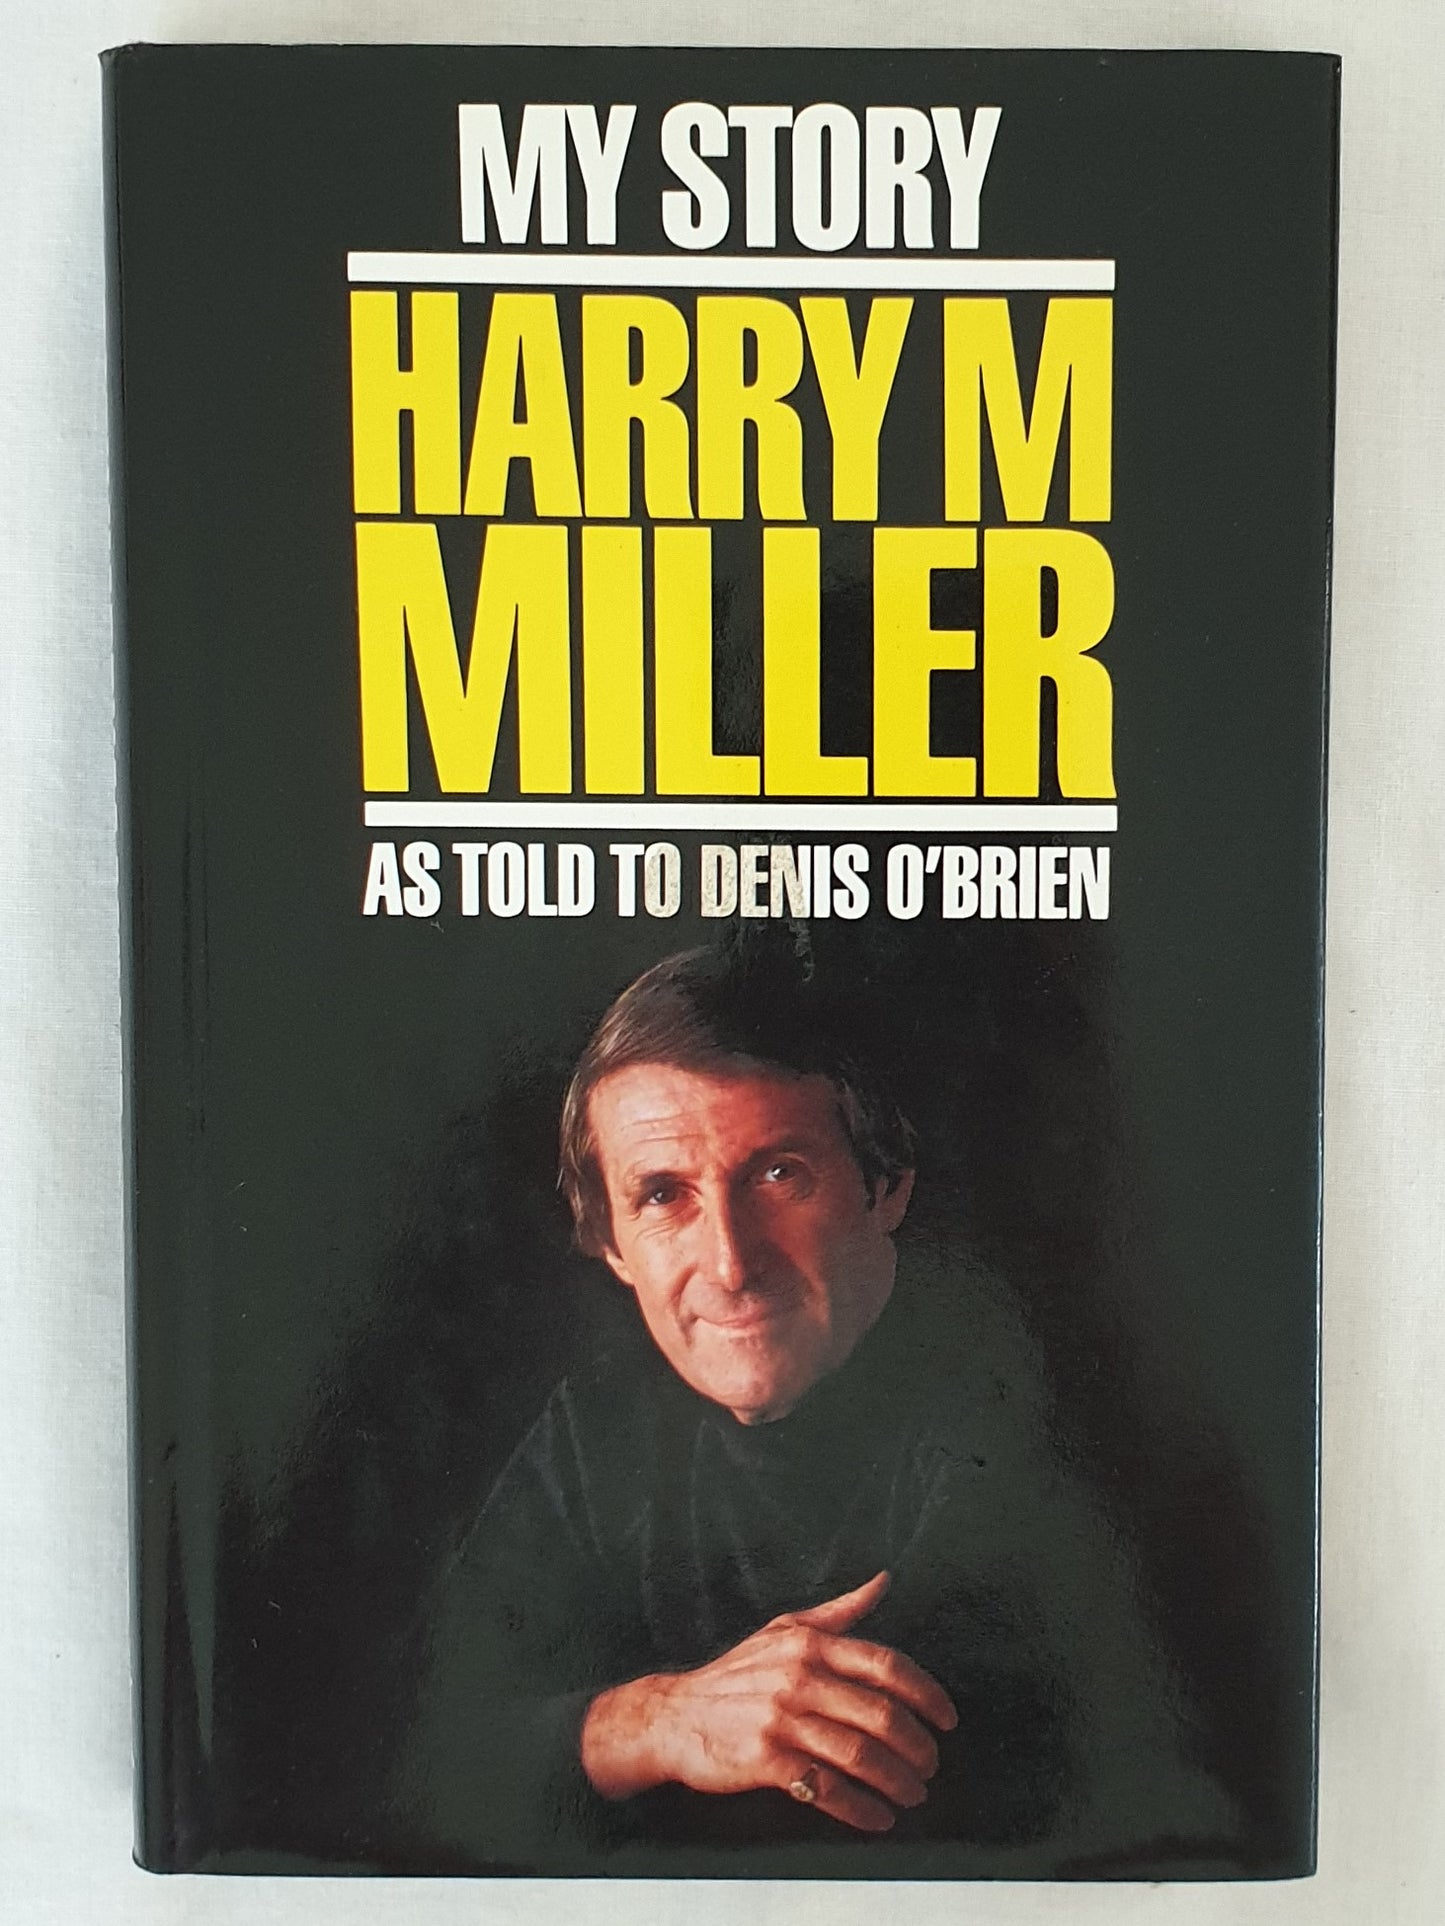 My Story Harry M Miller  As Told to Denis O'Brien  by Harry M Miller